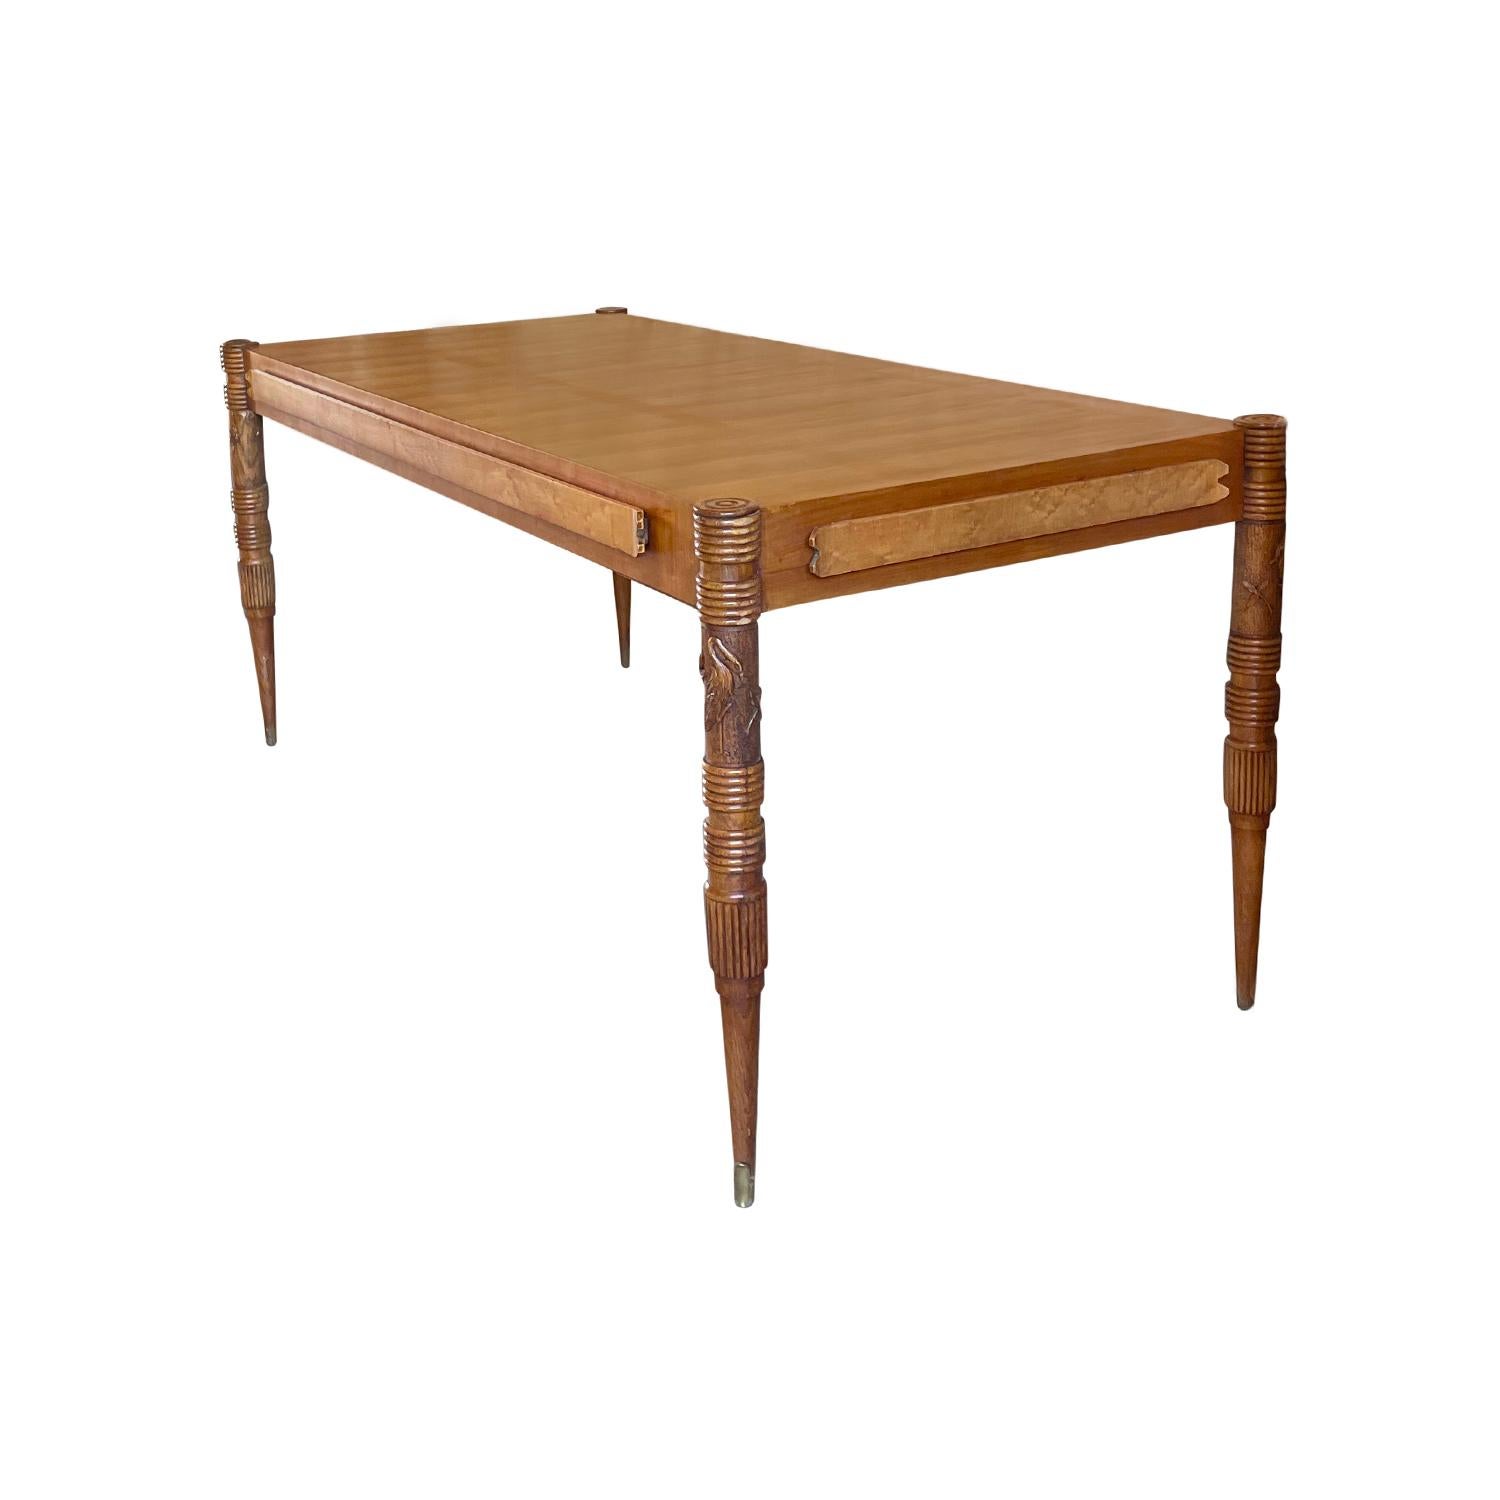 20th Century Italian Vintage Ashwood Dining Room Table by Pier Luigi Colli In Good Condition For Sale In West Palm Beach, FL